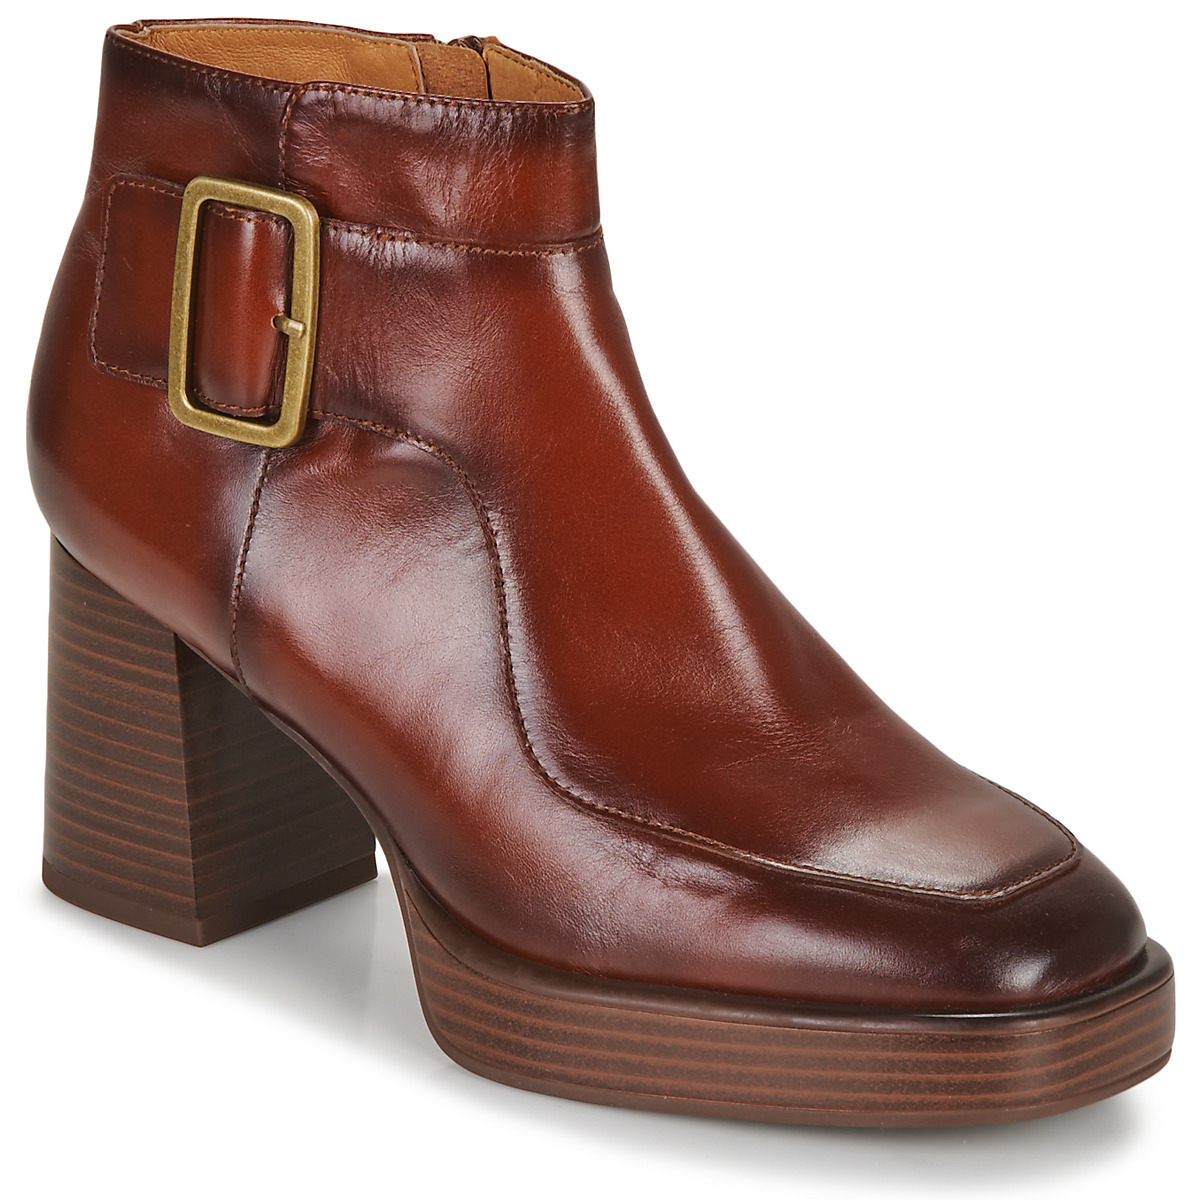 Ankle Boots Brown for Women at Spartoo GOOFASH